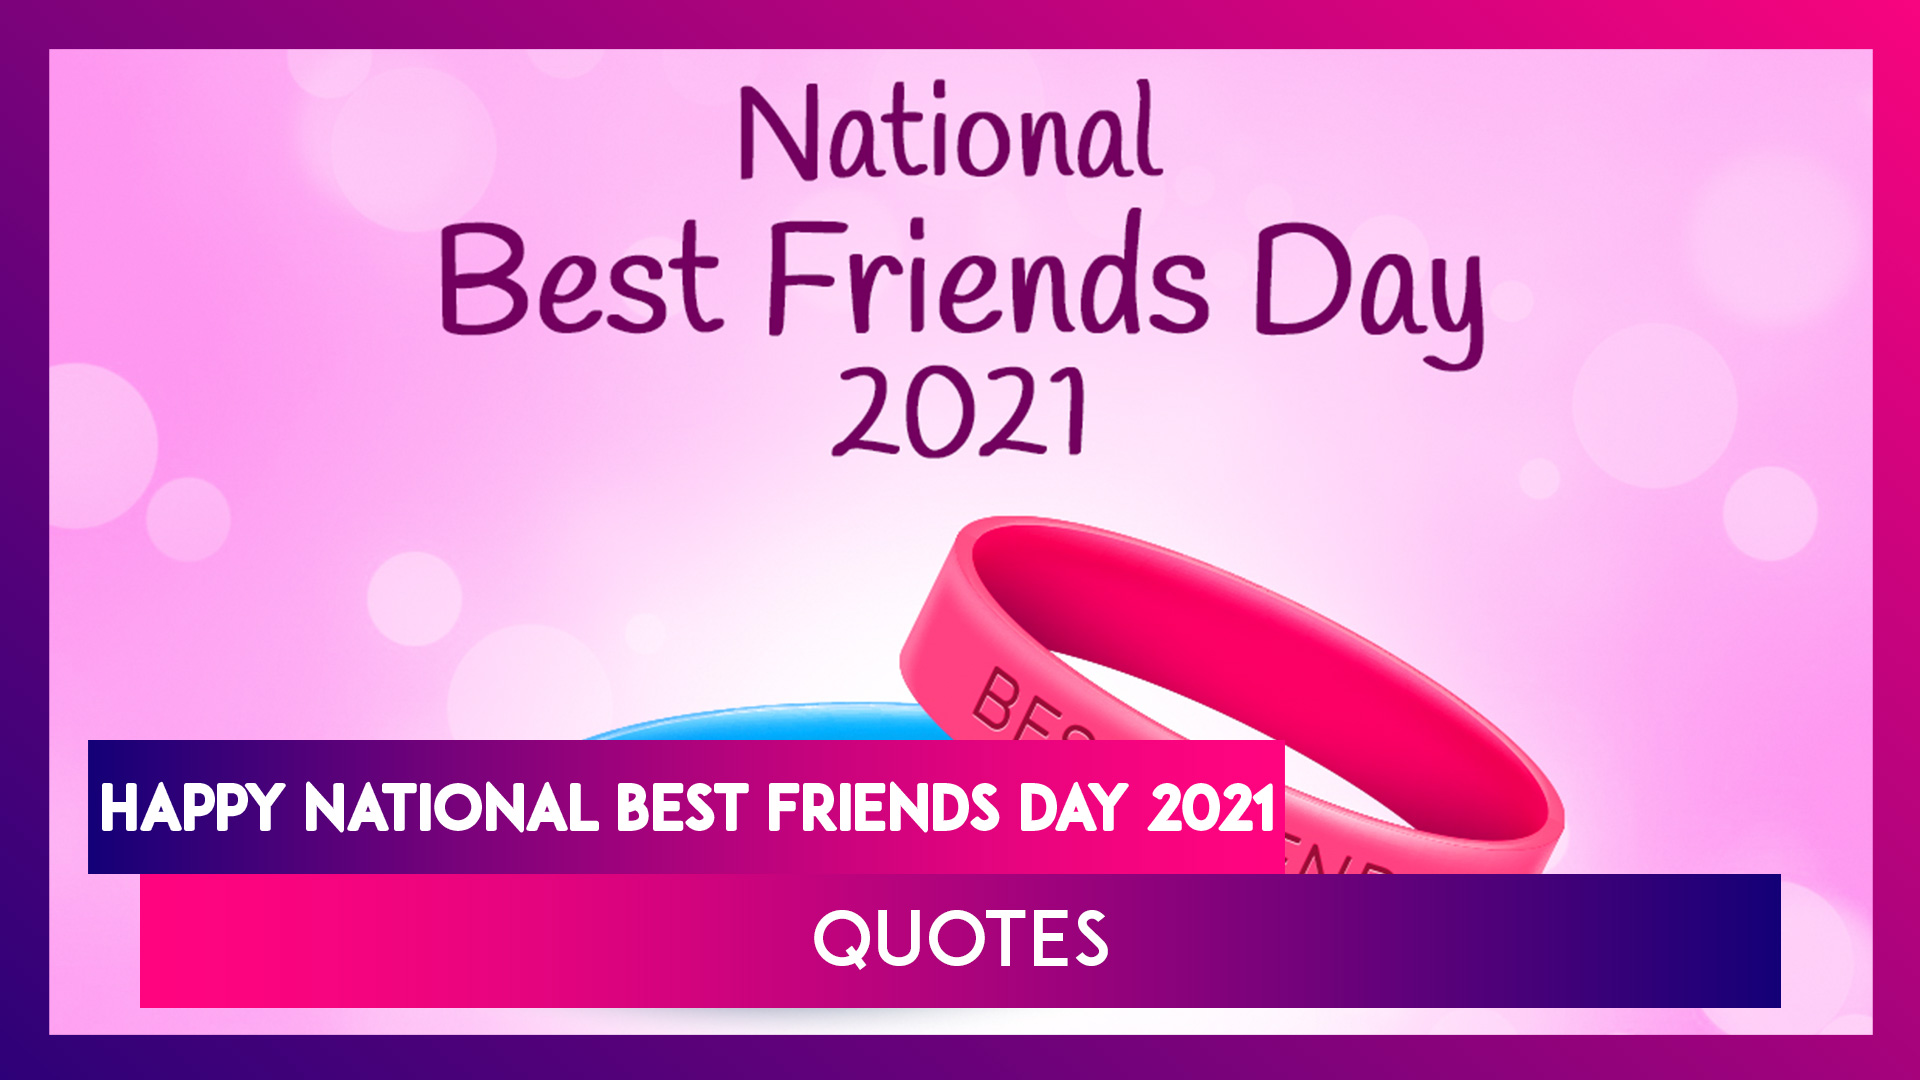 National Friendship Day 2021 Quotes National Best Friends Day 2021 Wishes Quotes Messages Hd